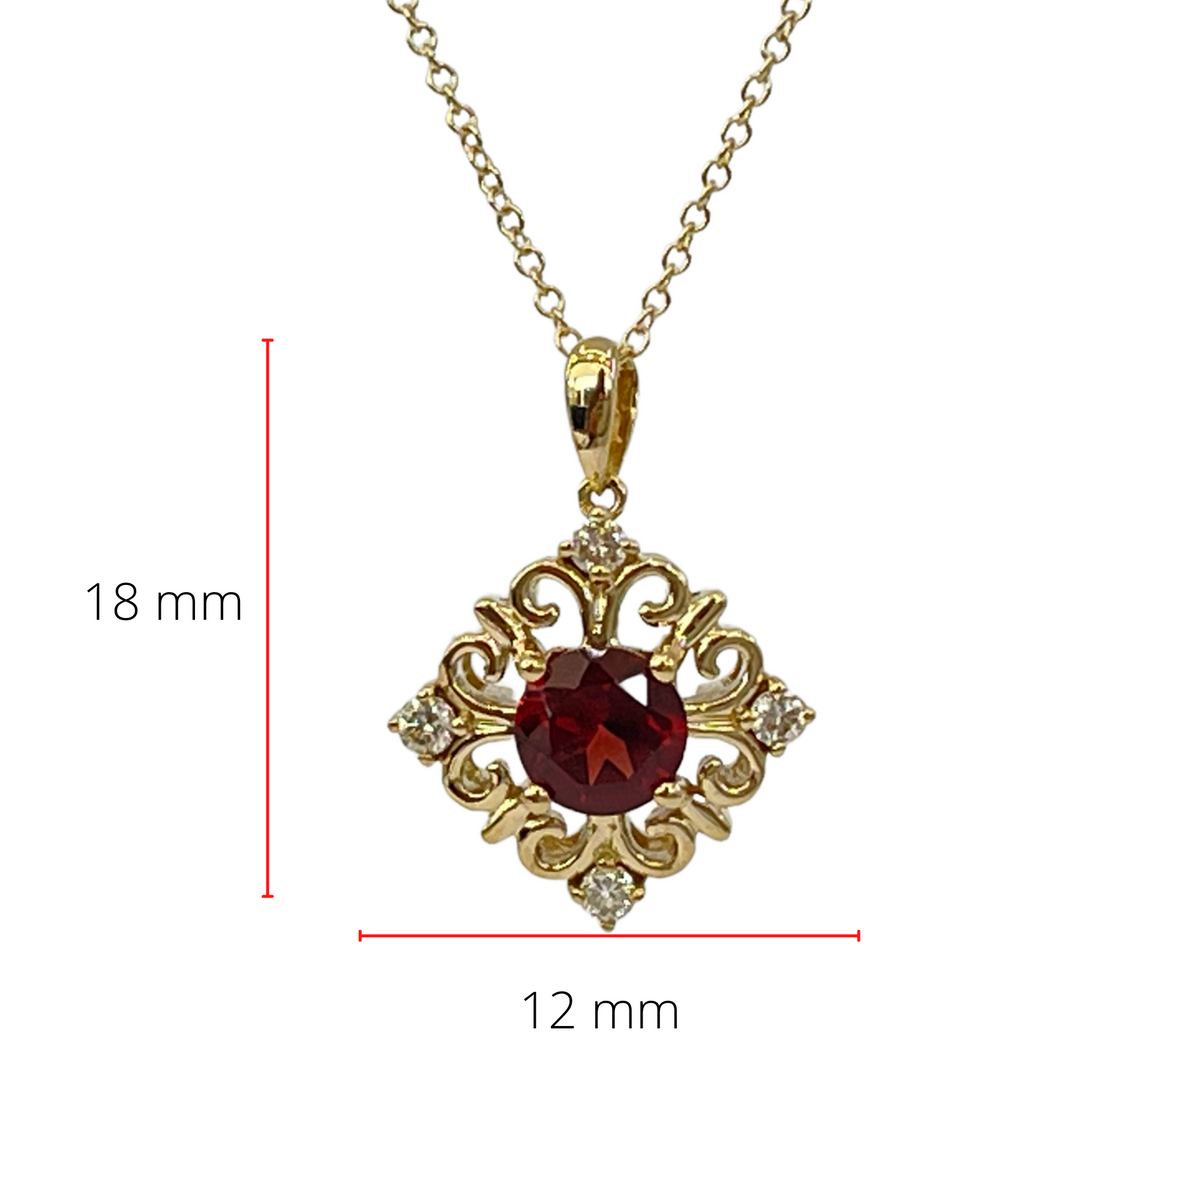 10K Yellow Gold 5mm Round Cut Garnet and 0.09cttw Diamond Pendant - 18 inches